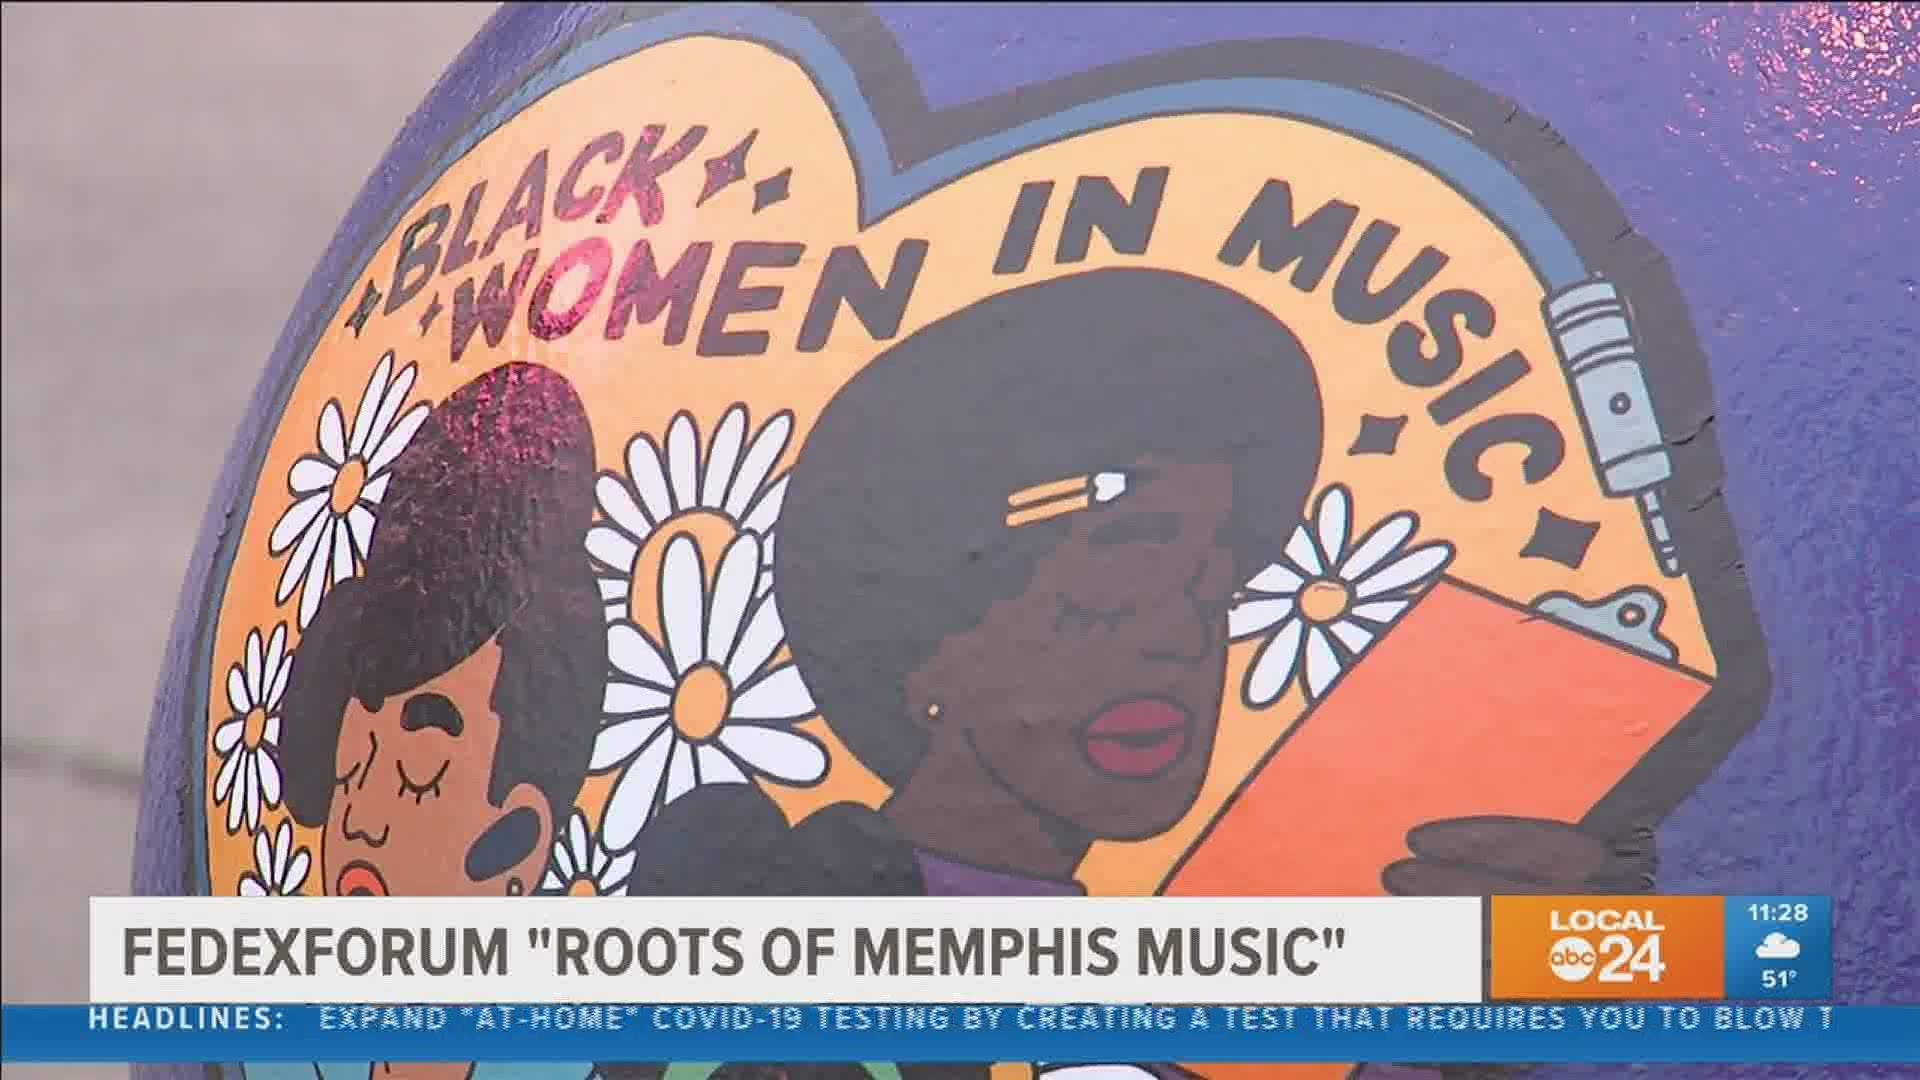 "The Roots of Memphis Music" outside FedEx Forum tells the story of Black Memphis history.